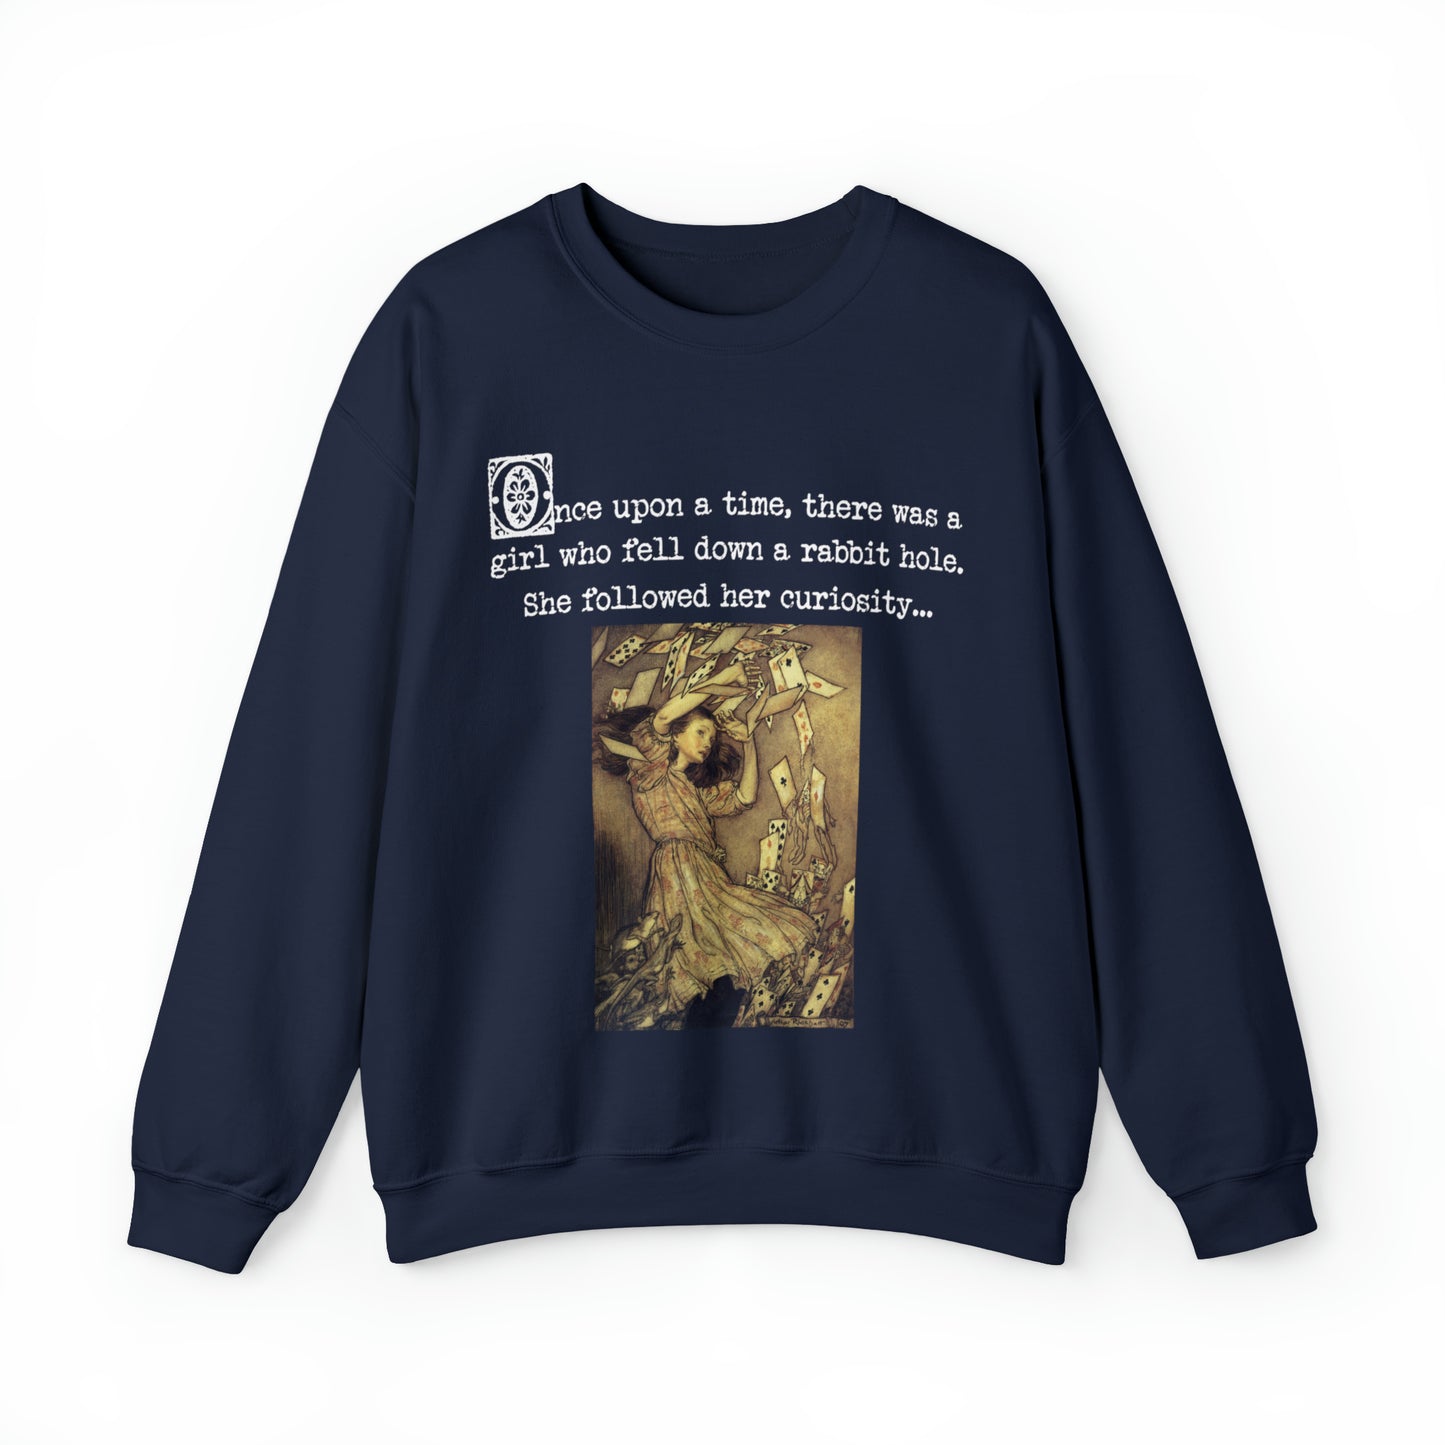 And Learned to Trust Her Instincts - Alice's Adventures in Wonderland Classic Fairytale Vintage Illustration Unisex Pullover Sweatshirt